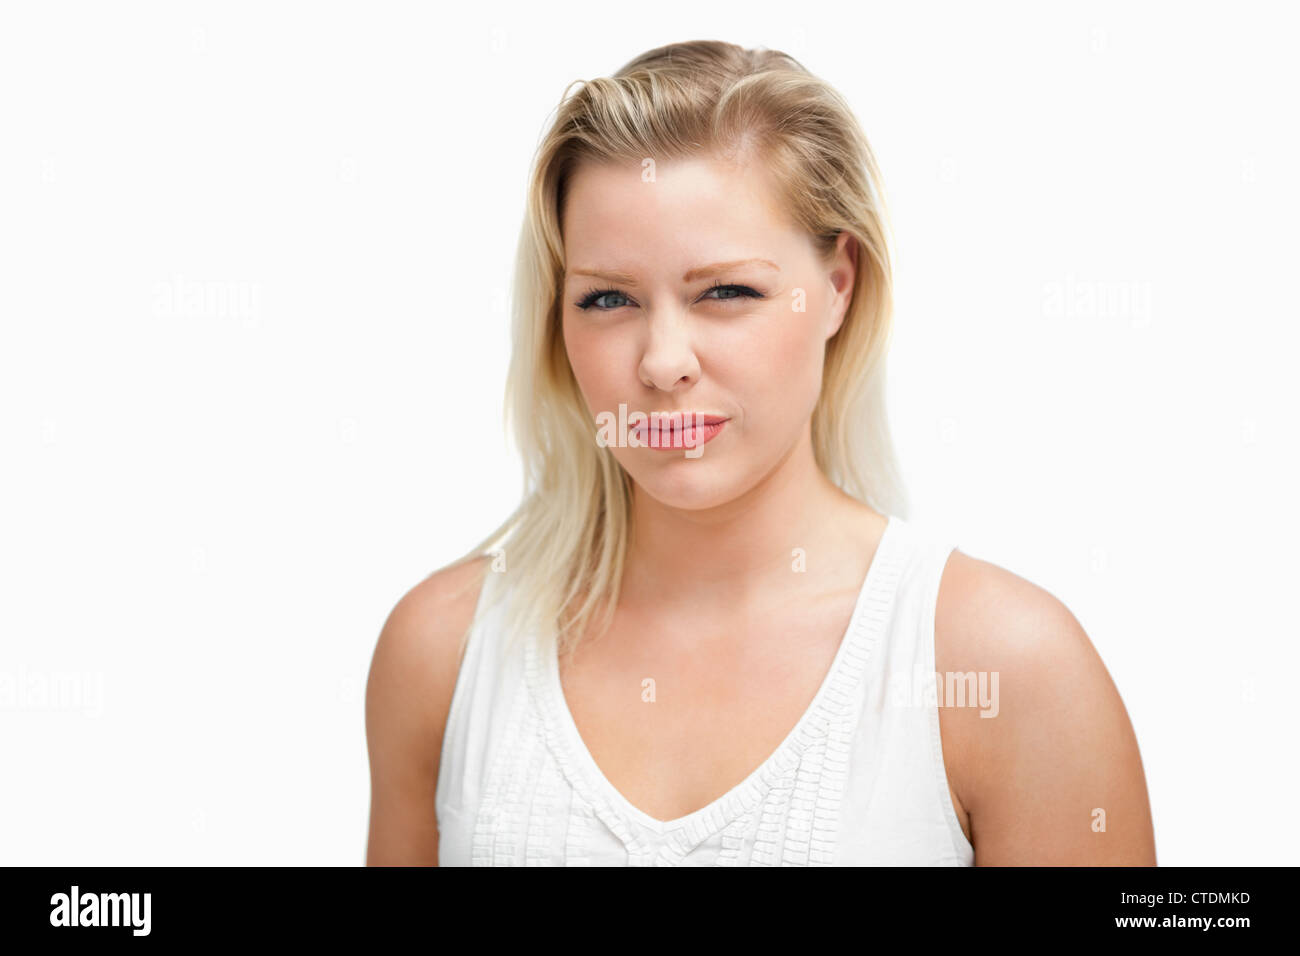 Serious attractive woman looking at the camera Stock Photo